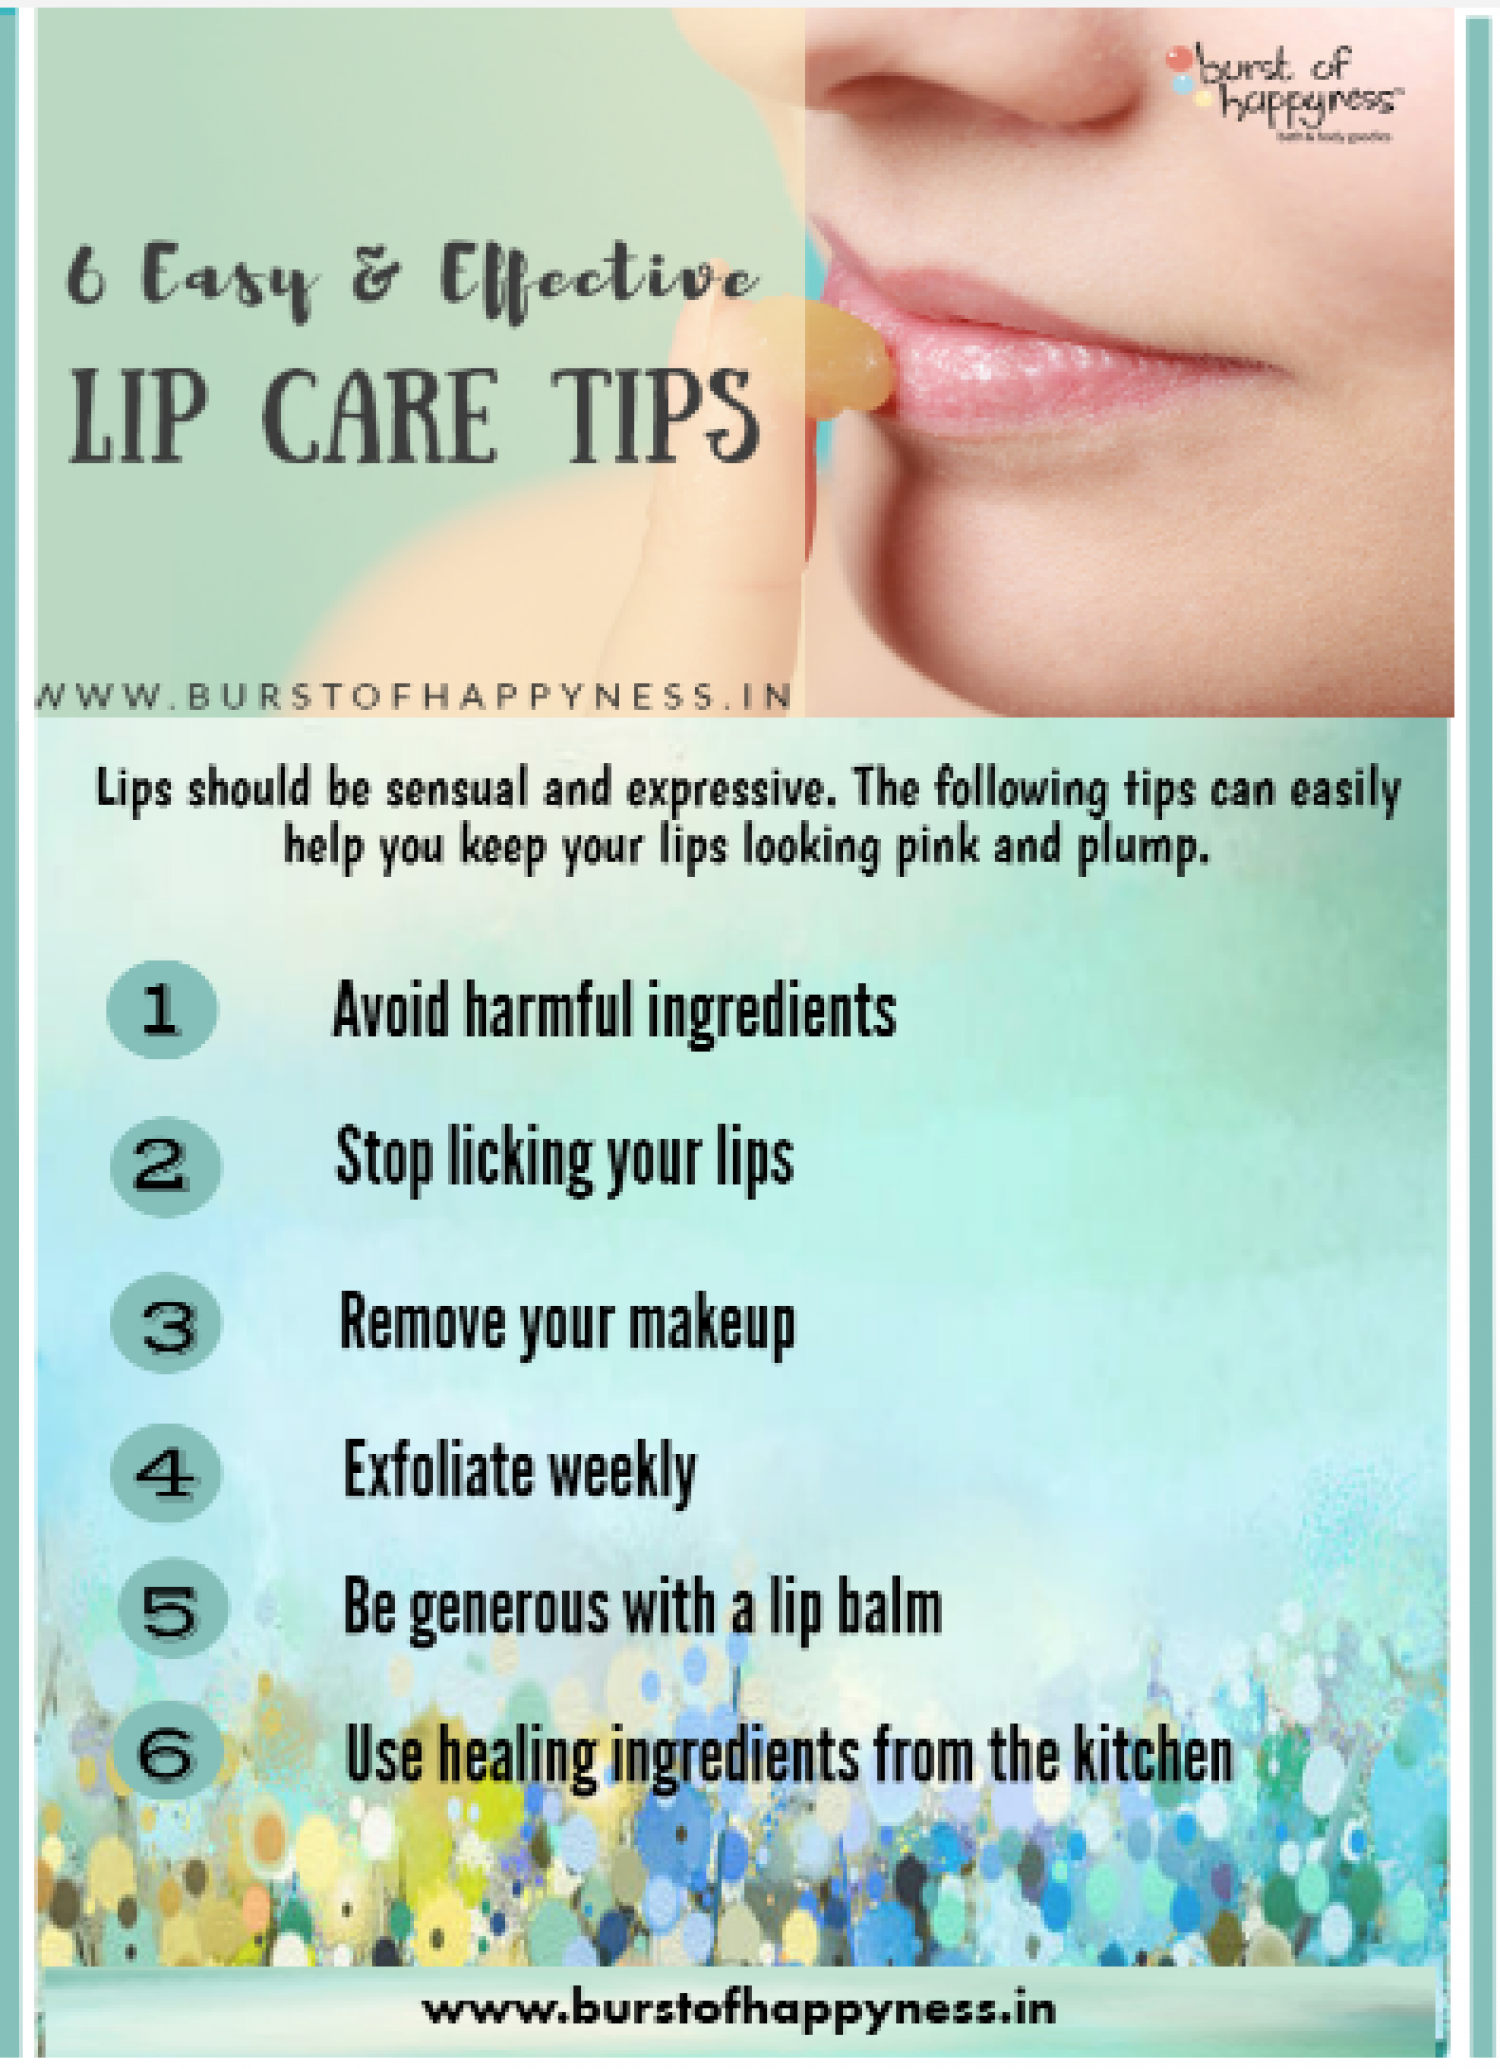 6 Easy And Effective Lip Care Tips Infographic